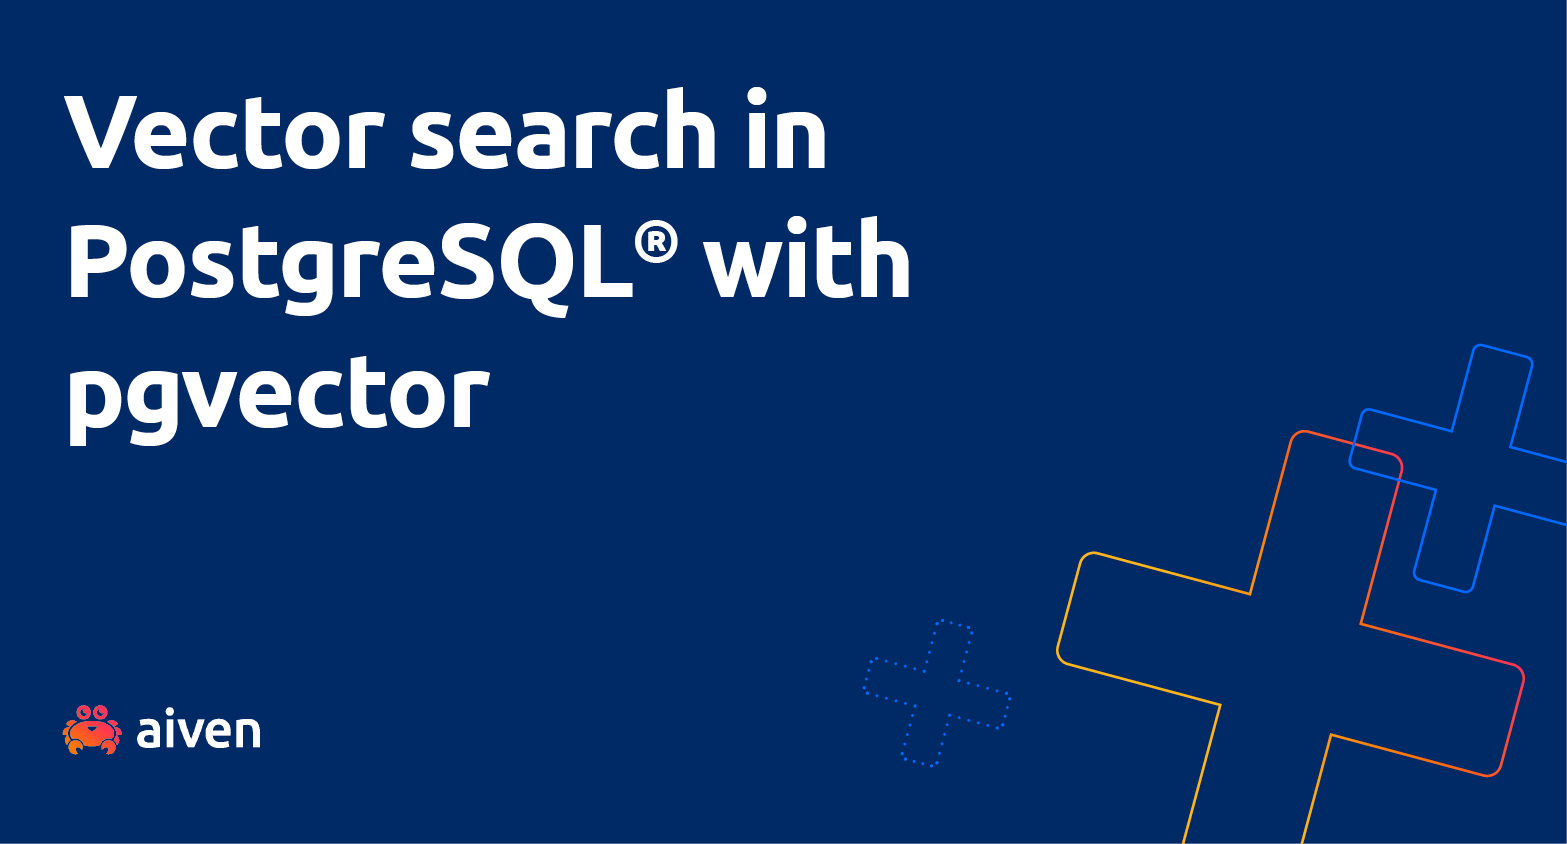 Vector Search in Aiven for PostgreSQL® with pgvector